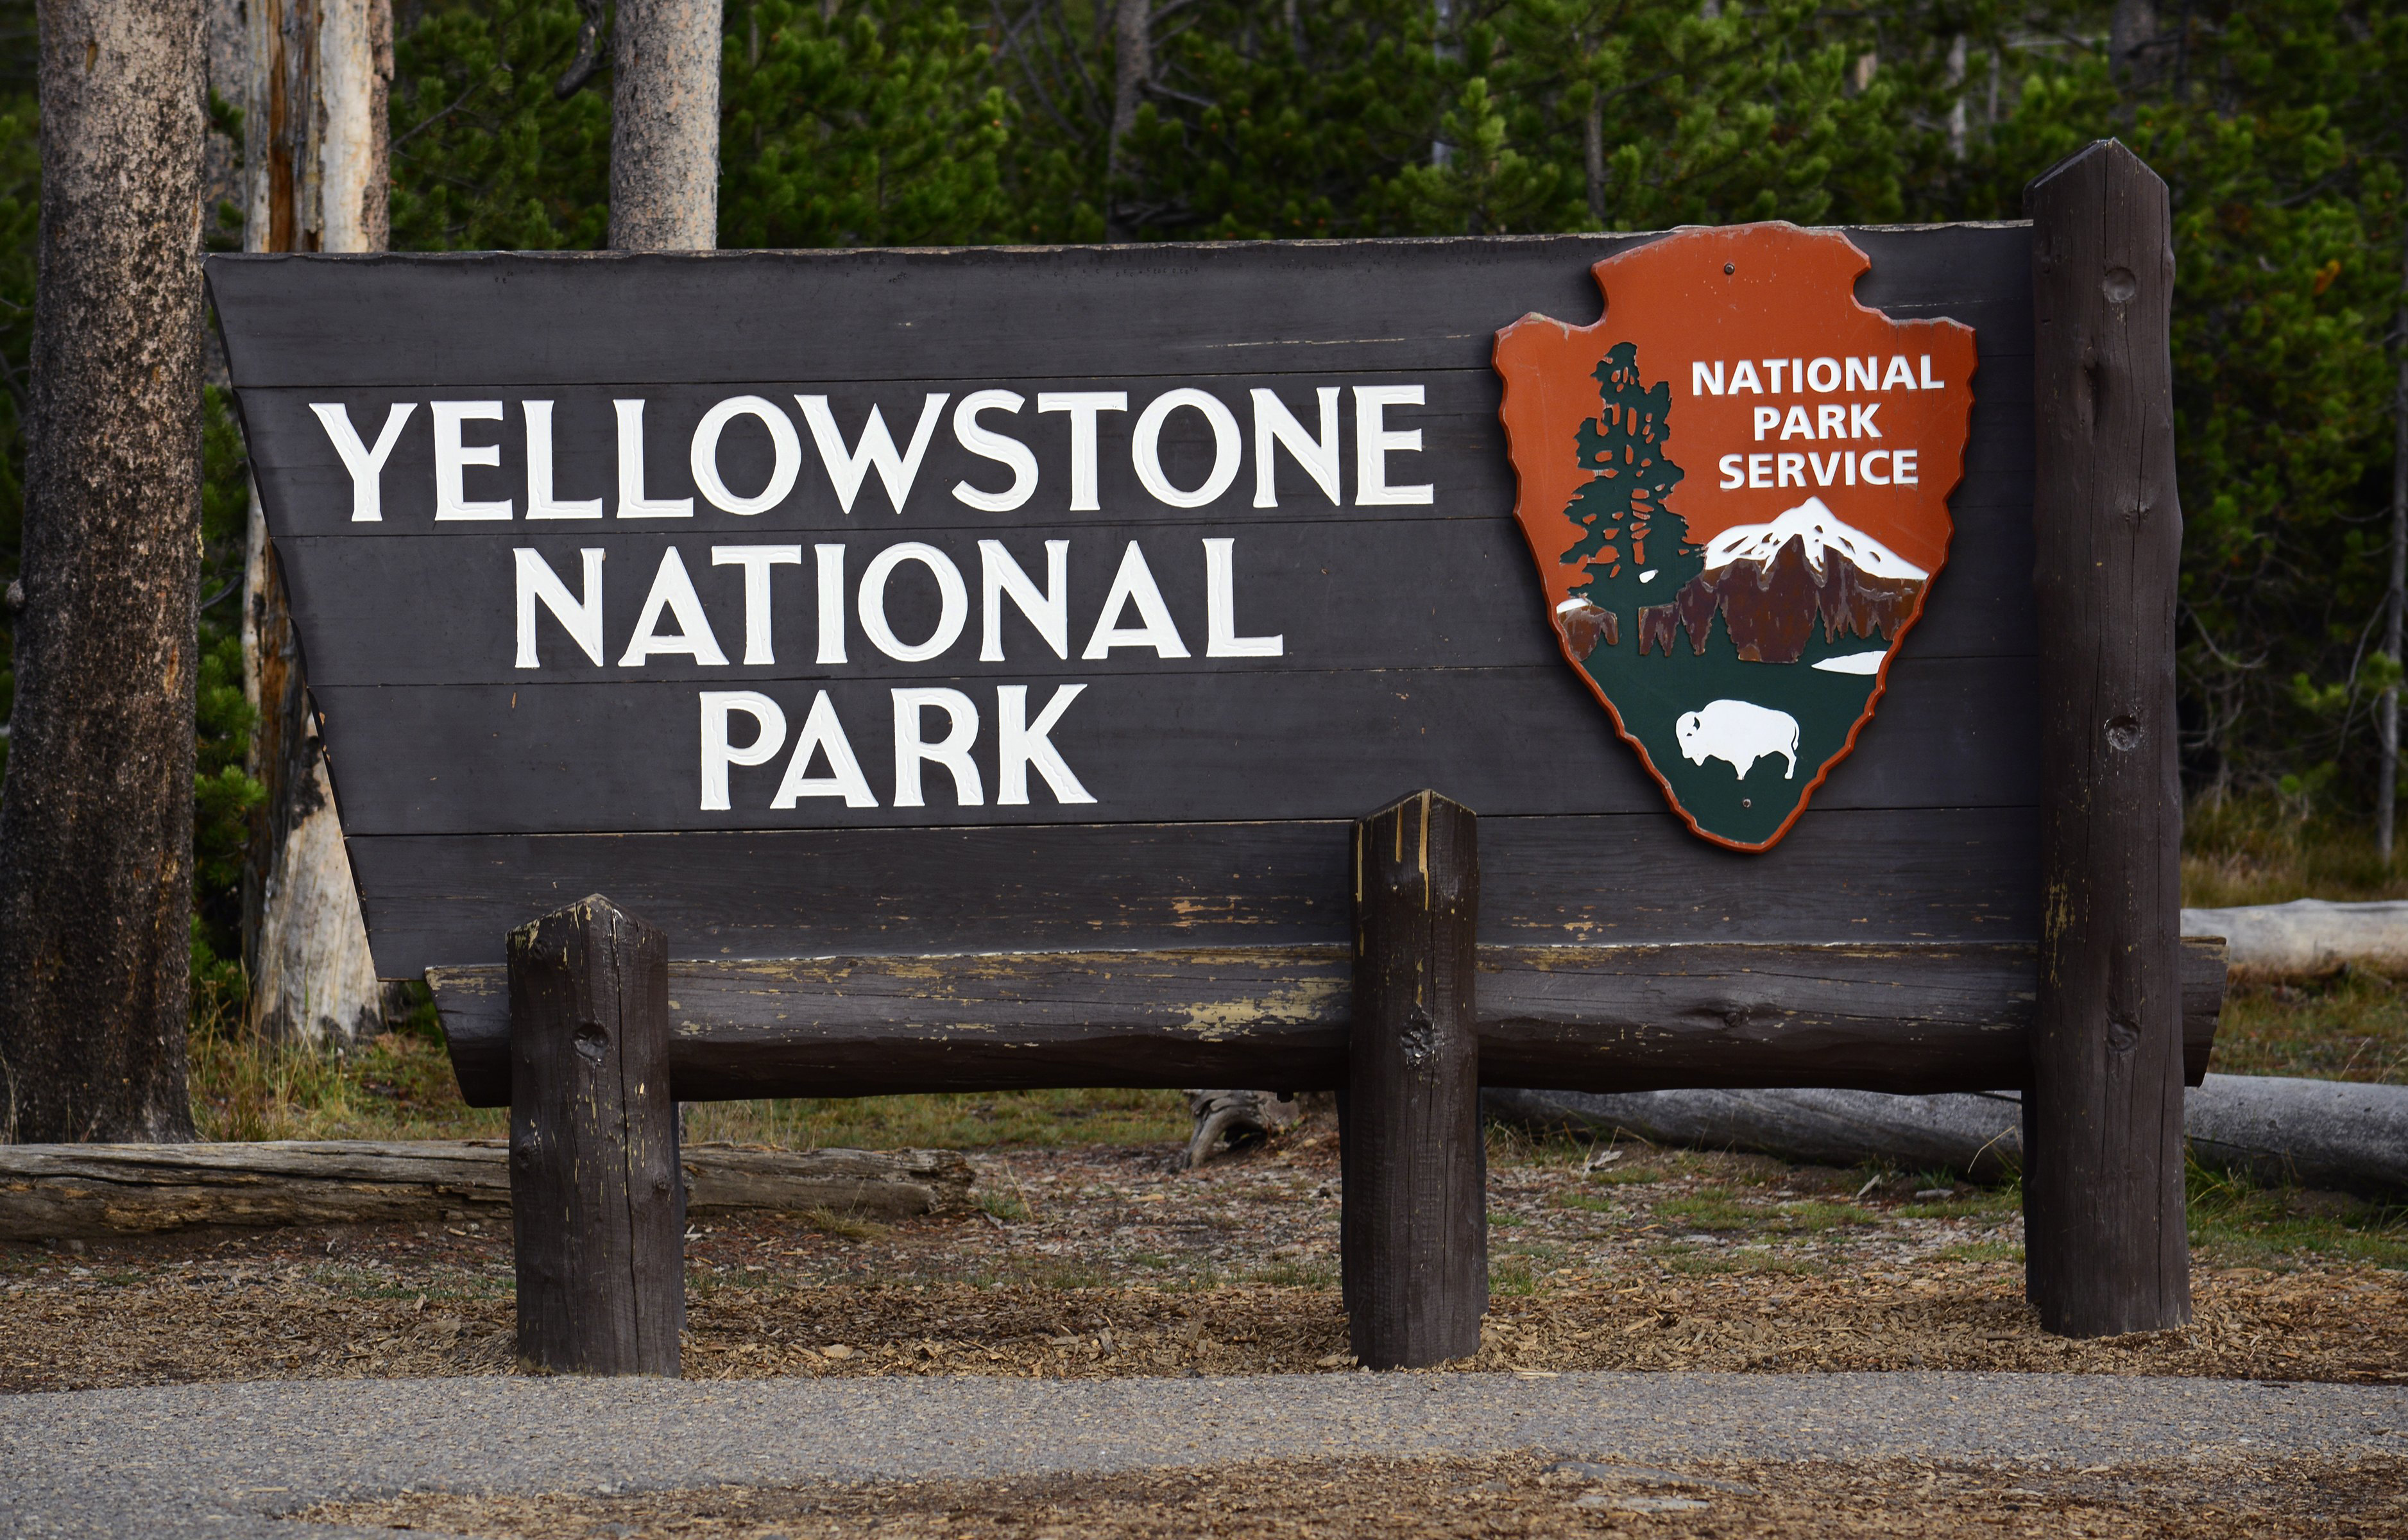 A National Park Service sign welcomes visitors to Yellowstone National Park in Wyoming. (Robert Alexander—Getty Images)